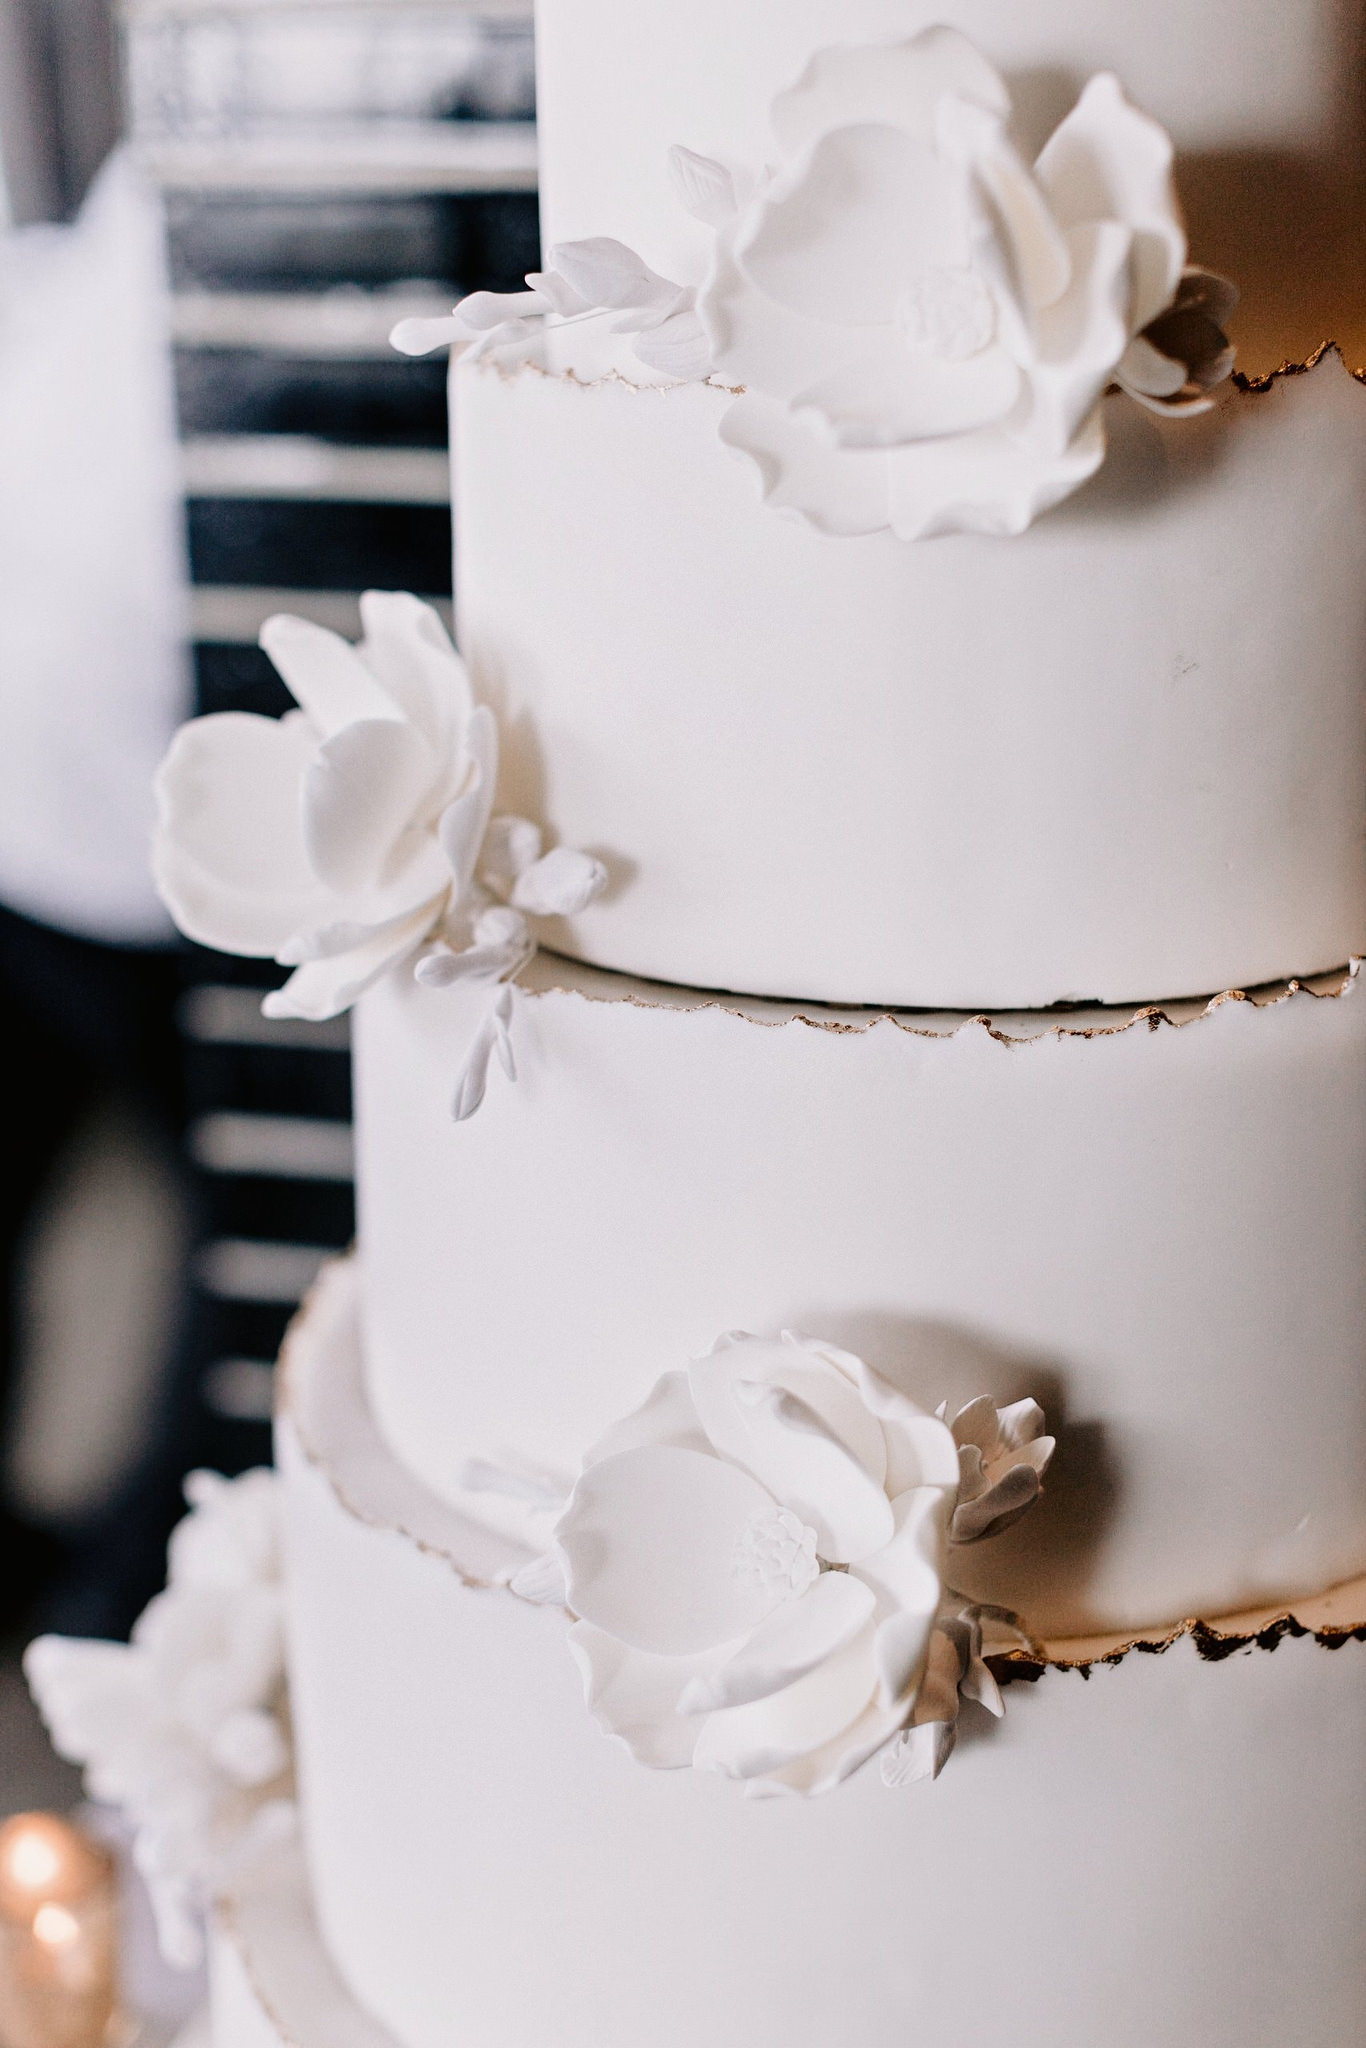 Close up of 5 tier white wedding cake with white flowers